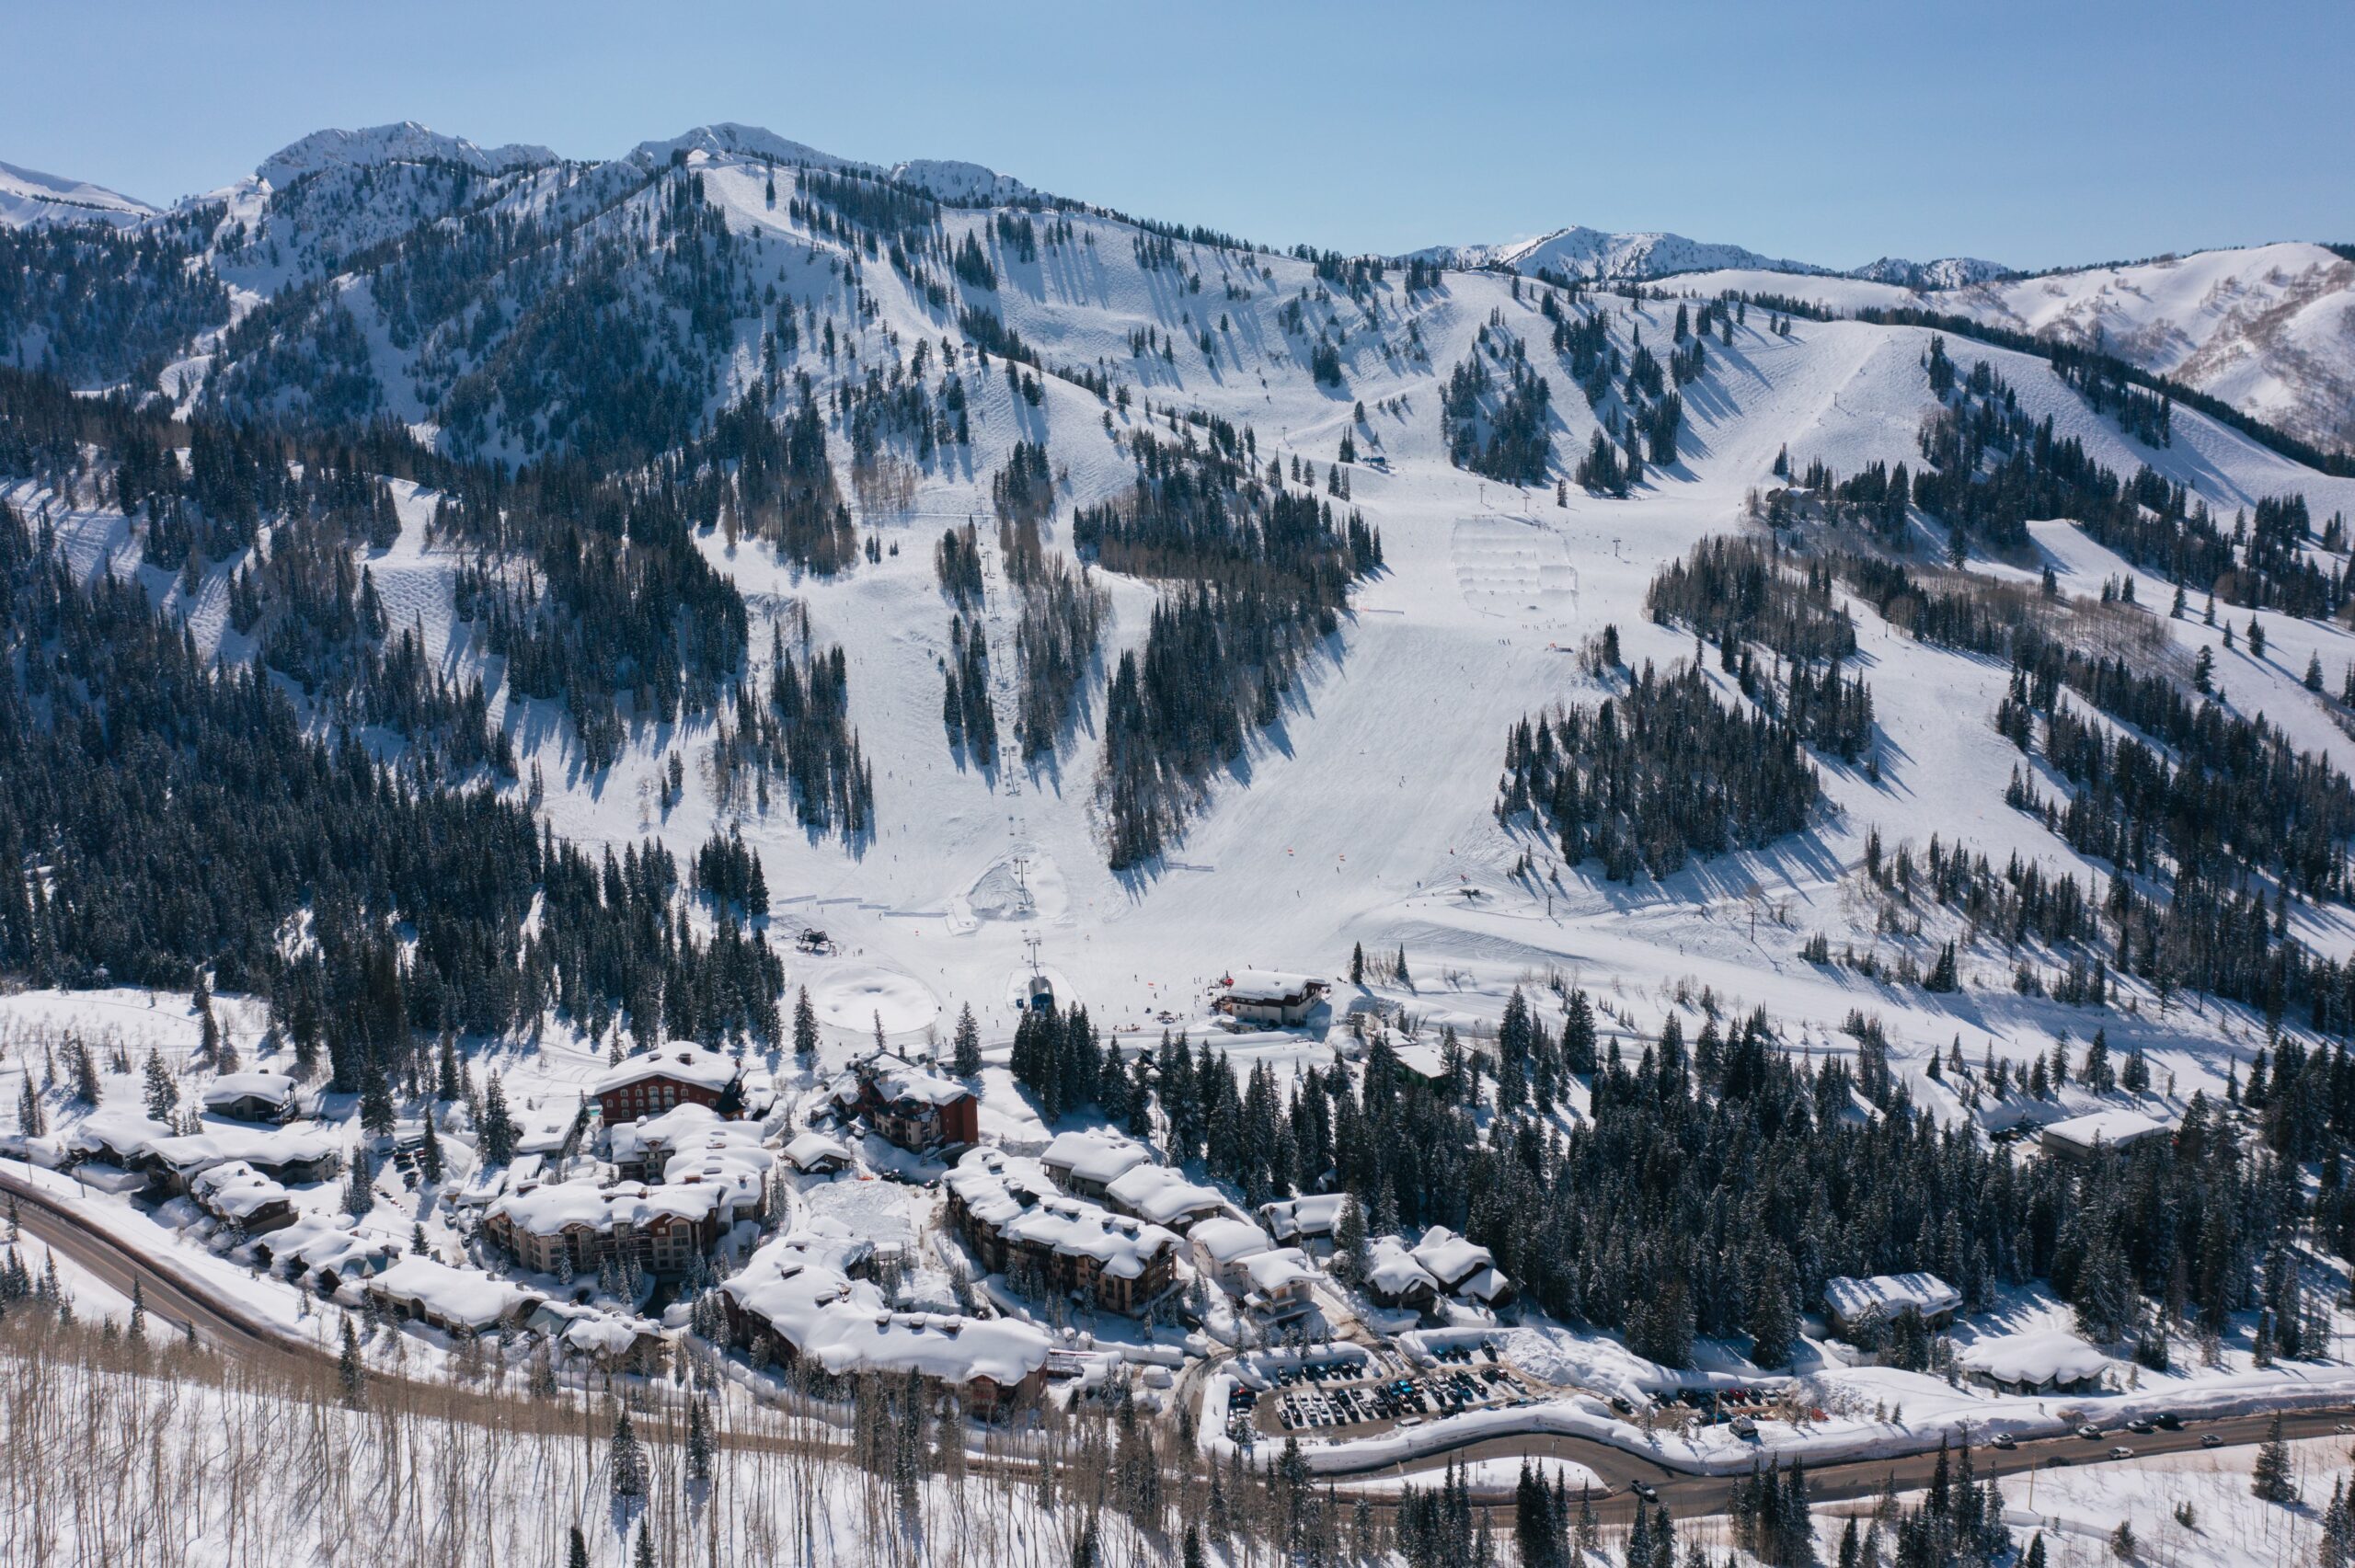 A drone shot view of the entire front side of Solitude Mountain Resort.